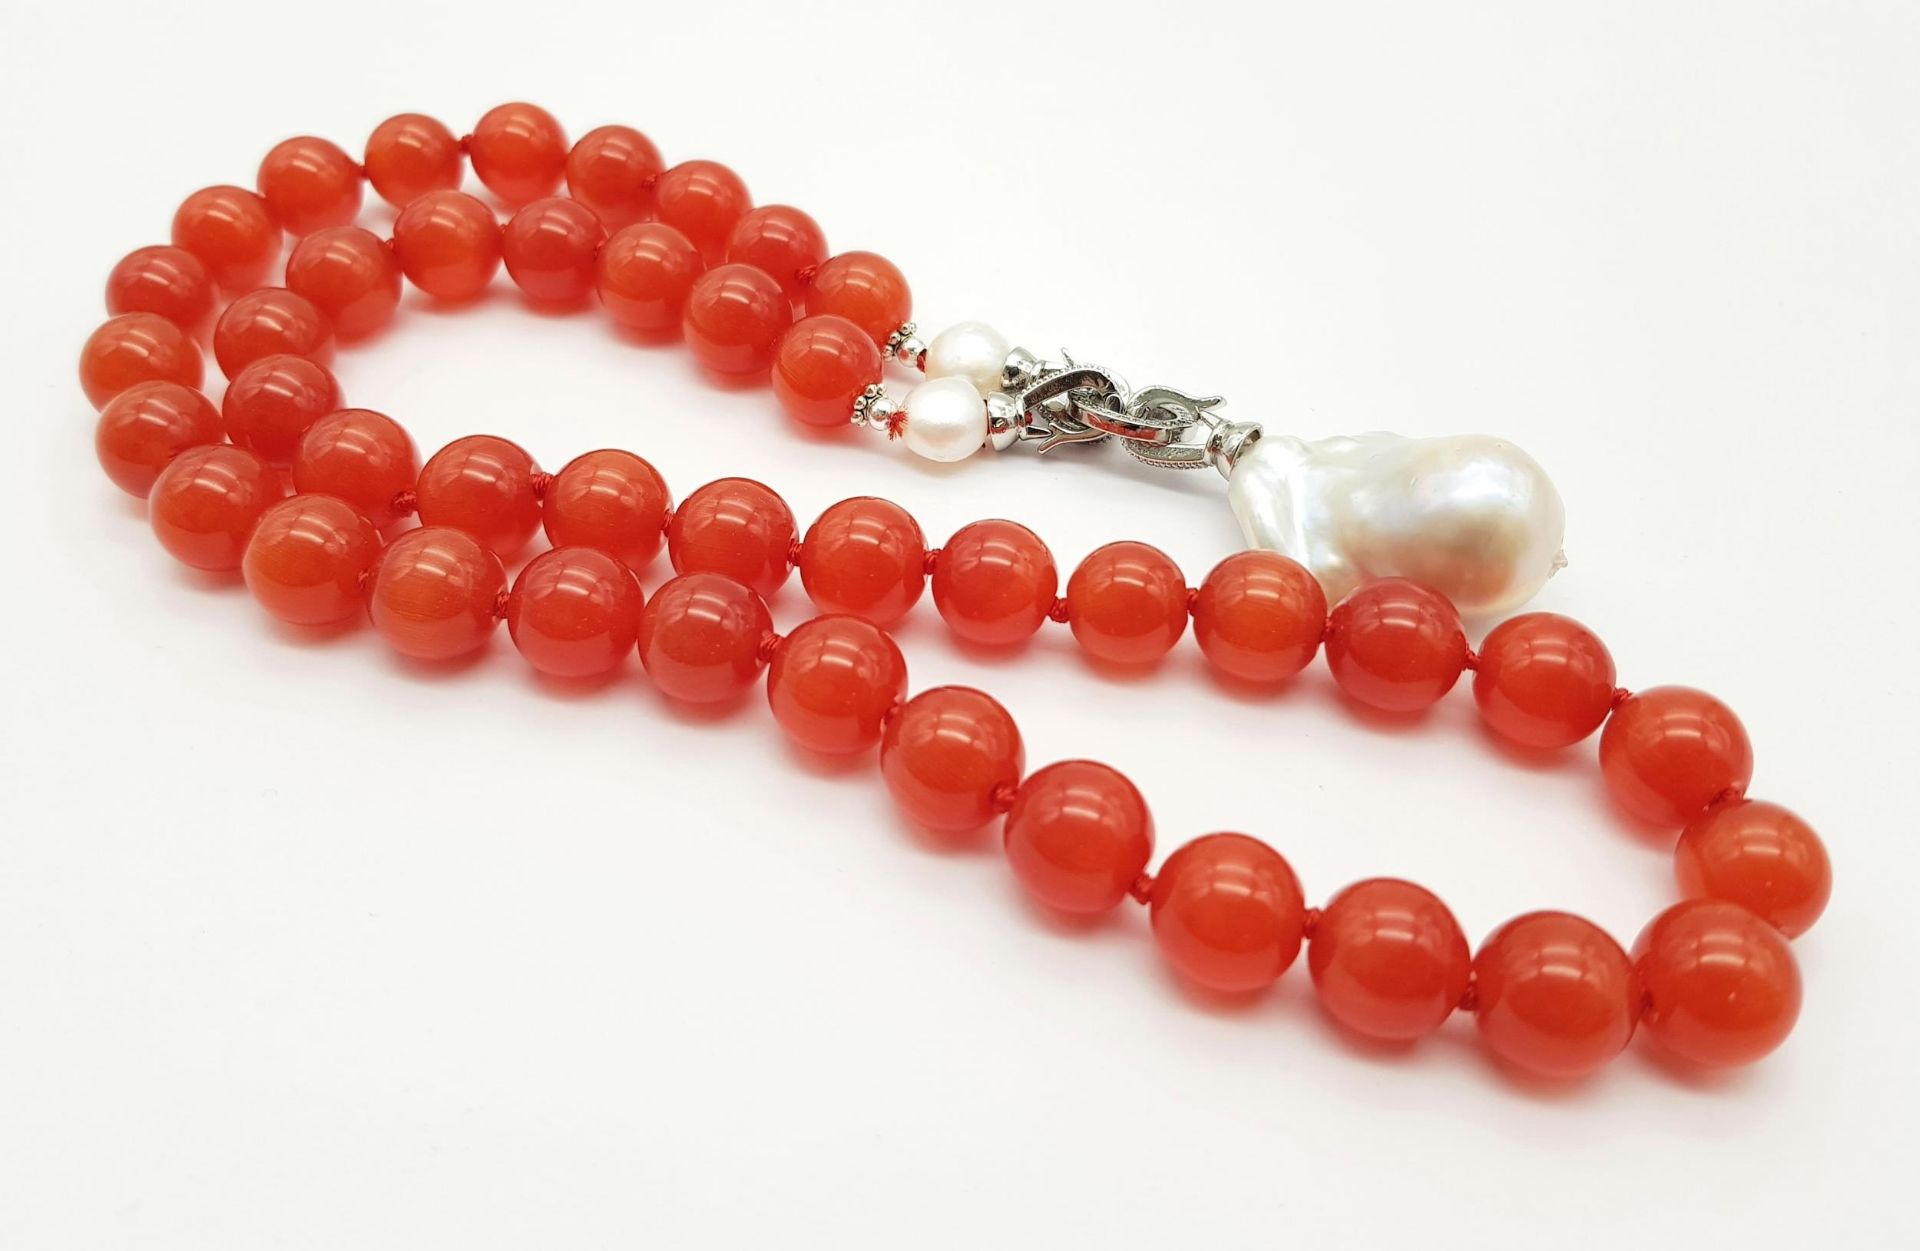 A Deep Orange Cat's Eye Beaded Necklace with a Hanging Keisha Baroque Pearl Pendant. 12mm beads. - Bild 4 aus 4